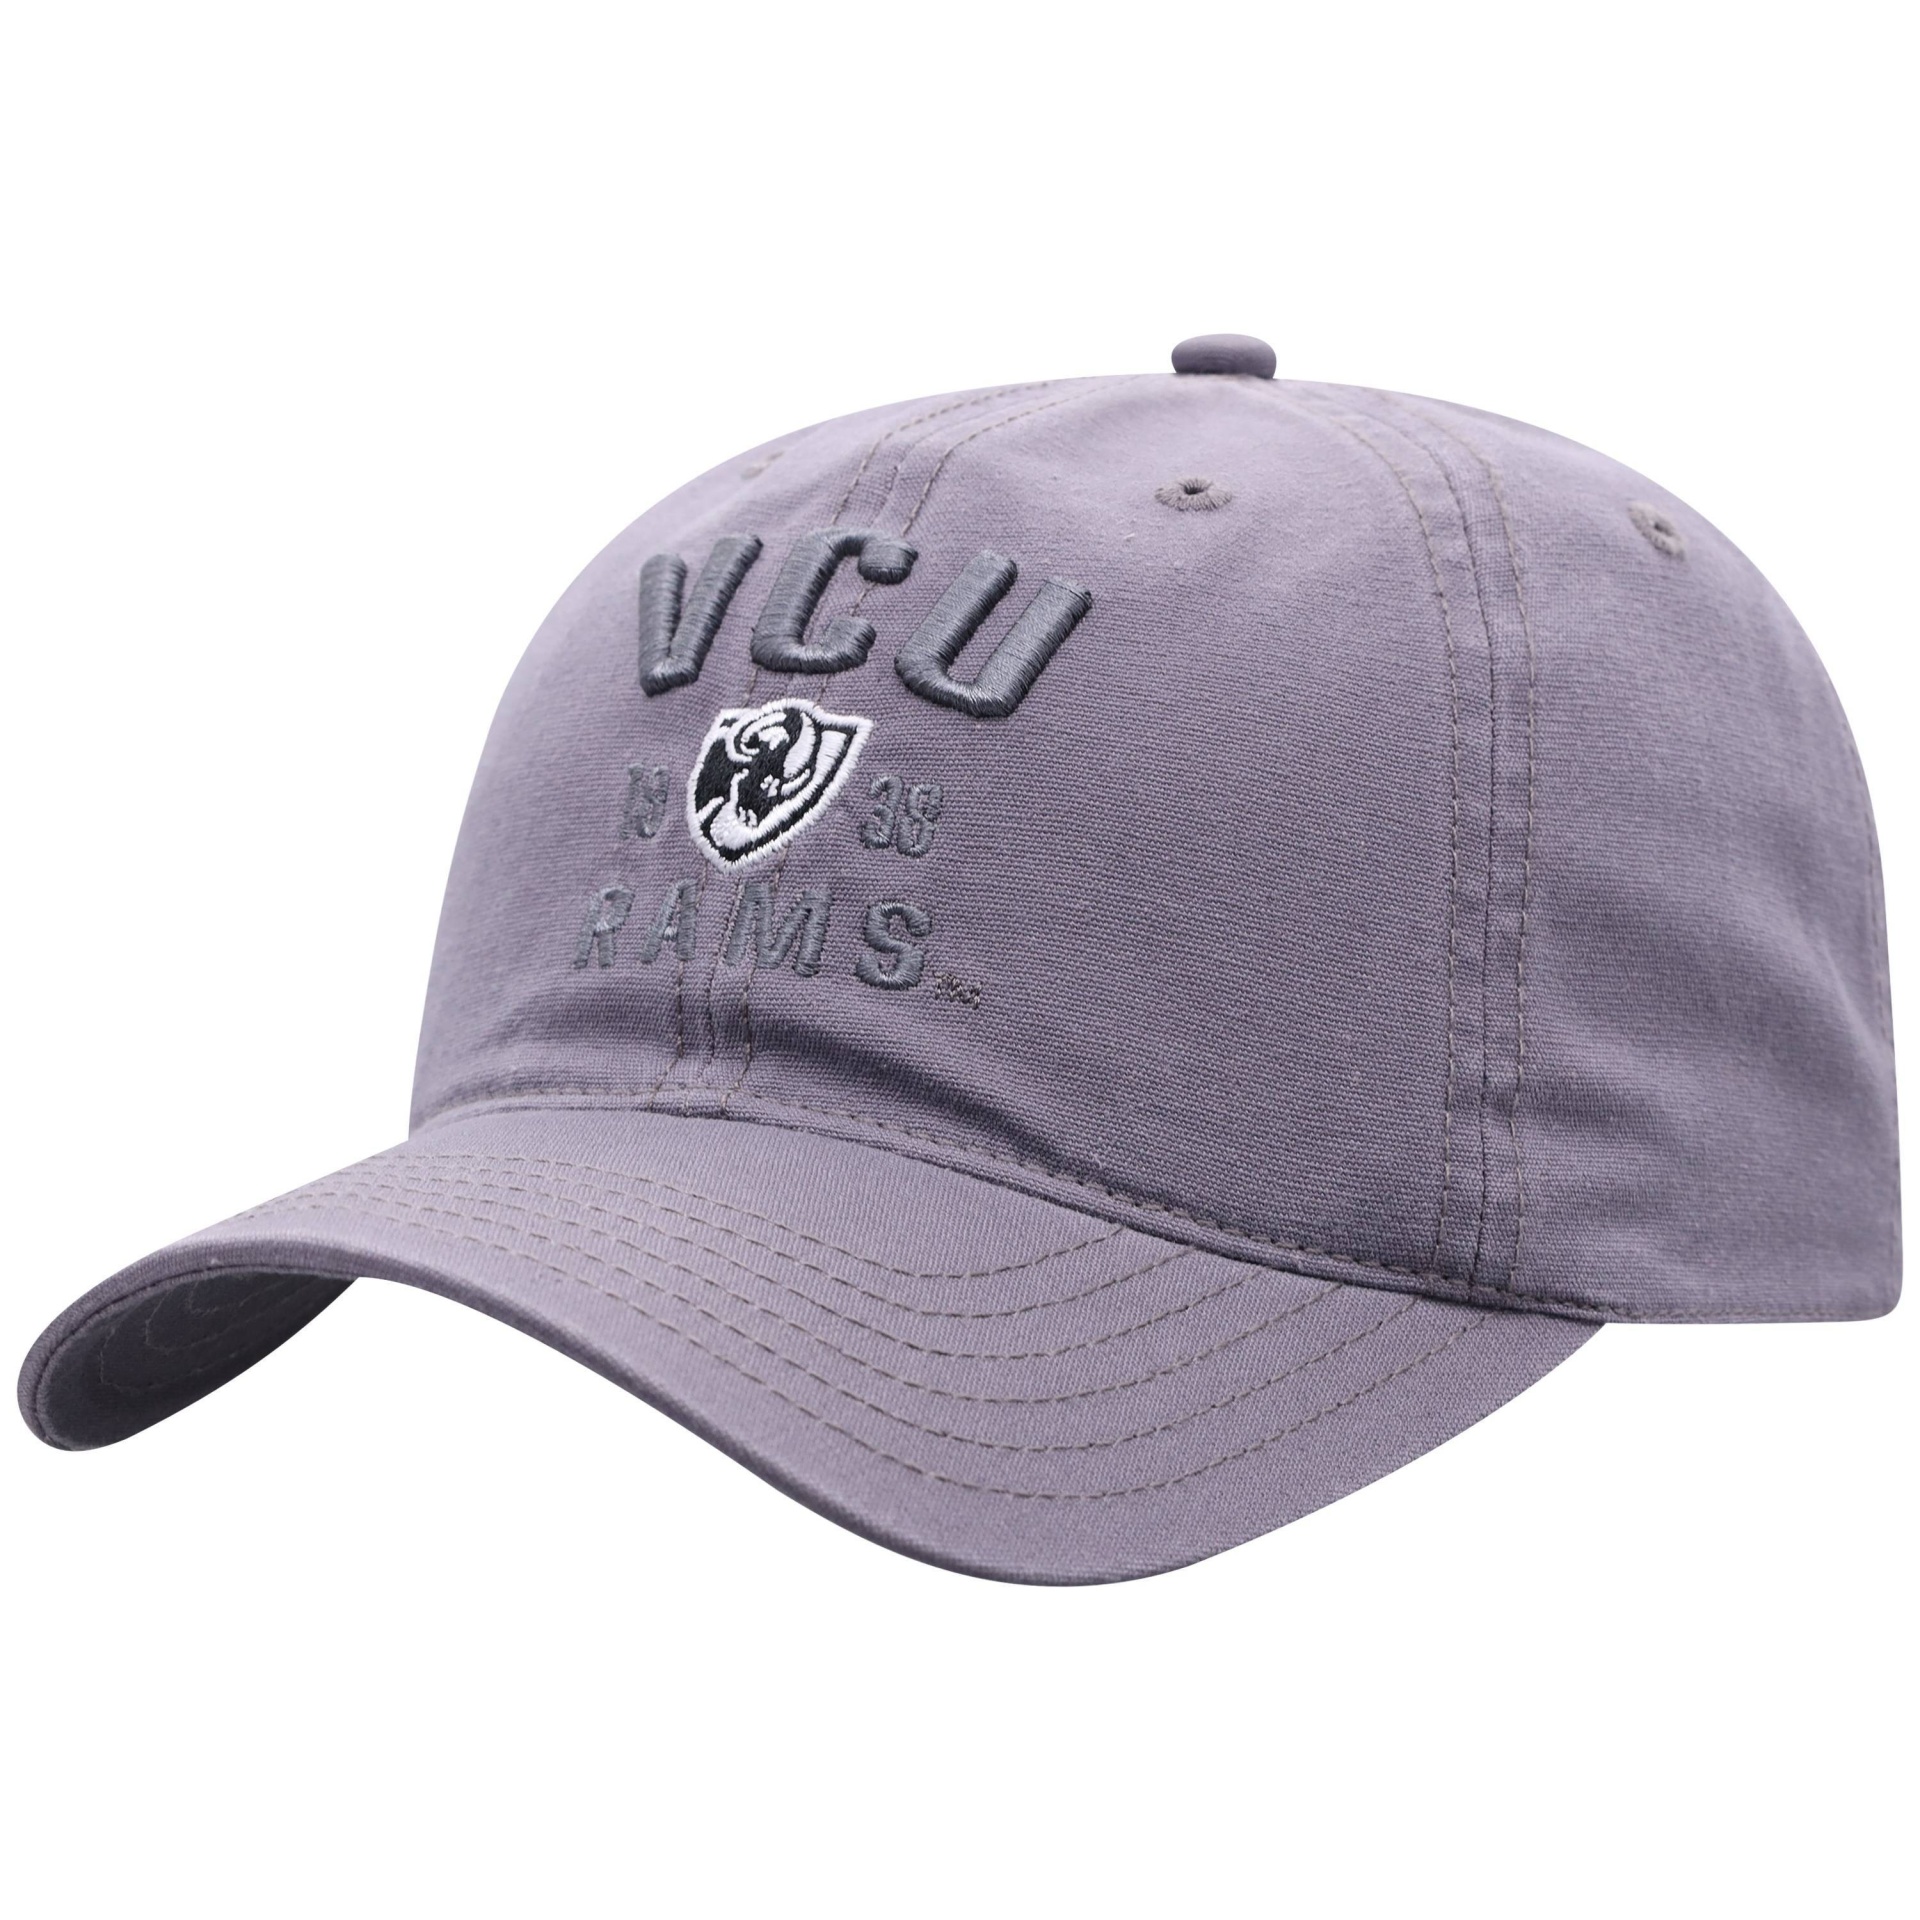 slide 1 of 2, NCAA VCU Rams Men's Skill Gray Garment Washed Canvas Hat, 1 ct